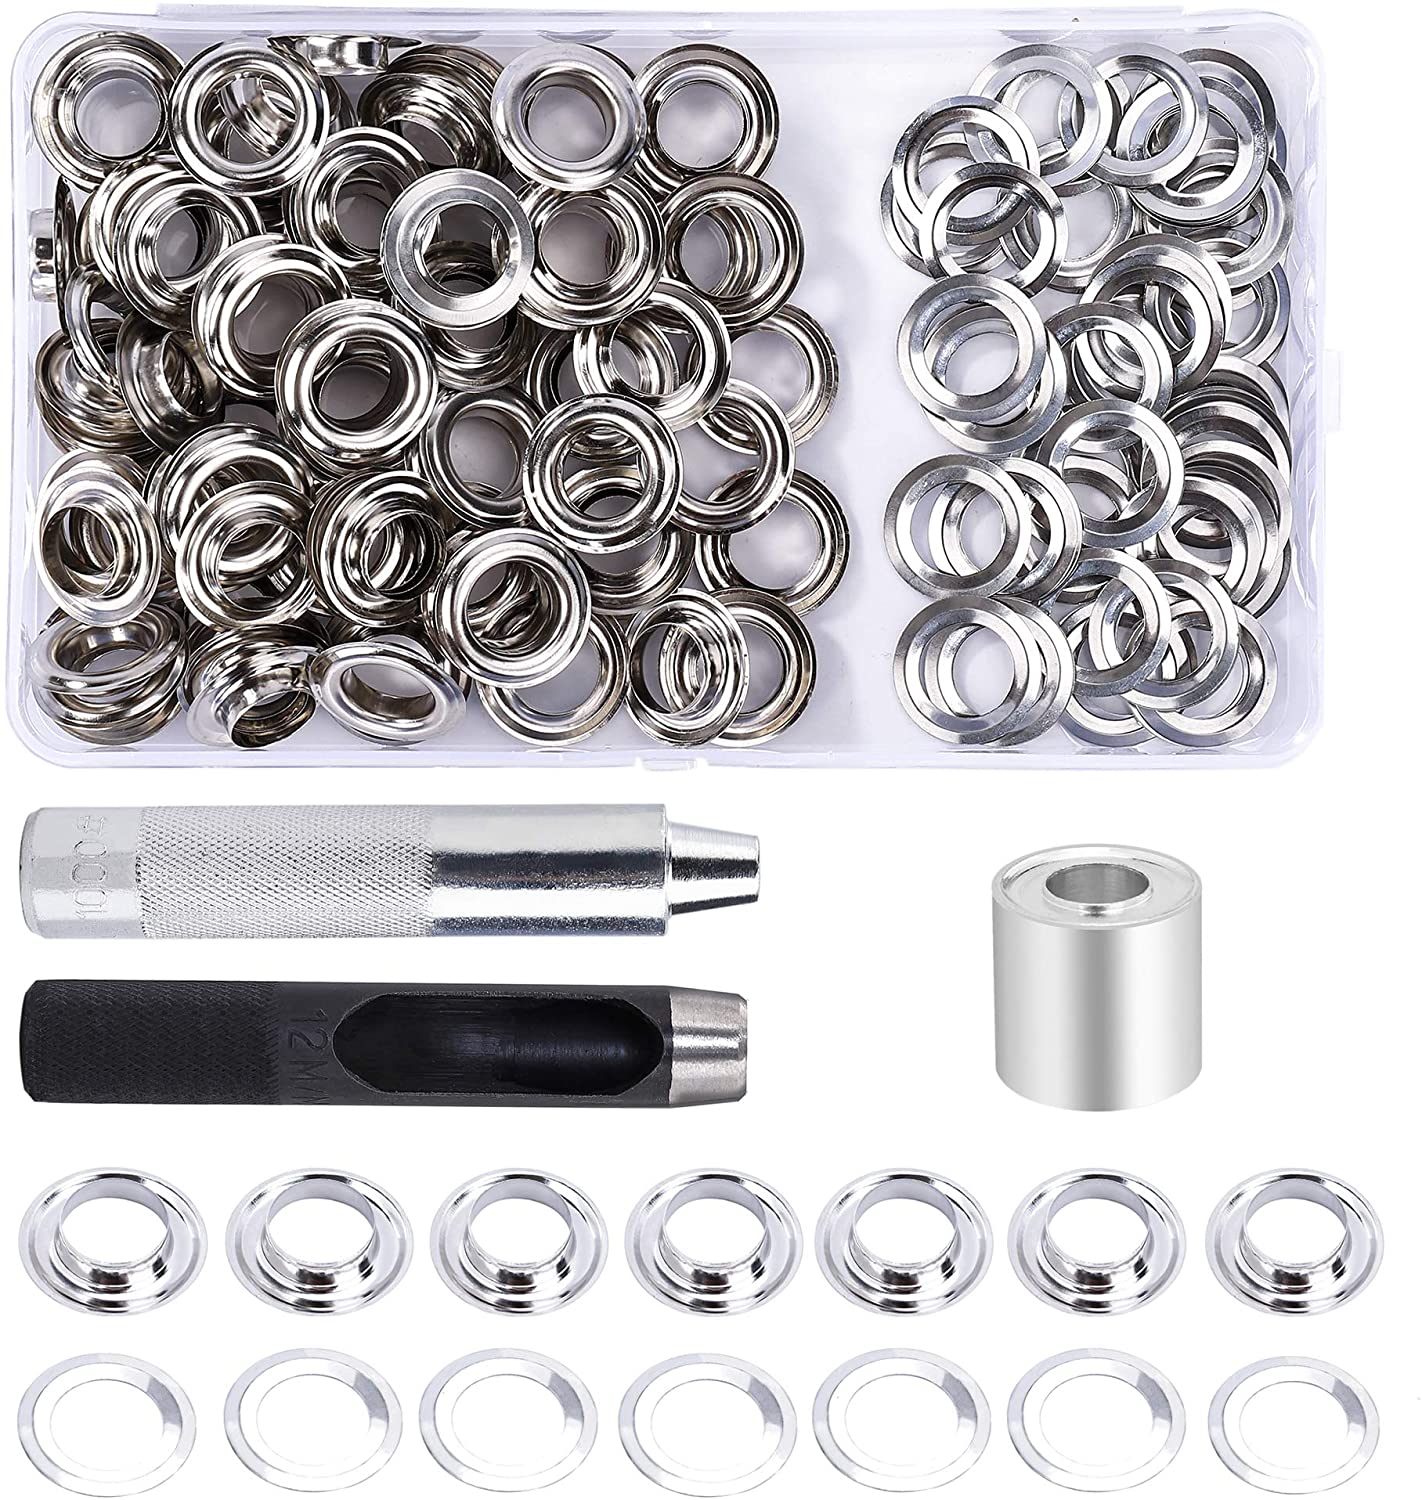 Grommet Tool Kit 100 Sets 1/2 Inch, Grommets Eyelets with 3 Pieces  Installation